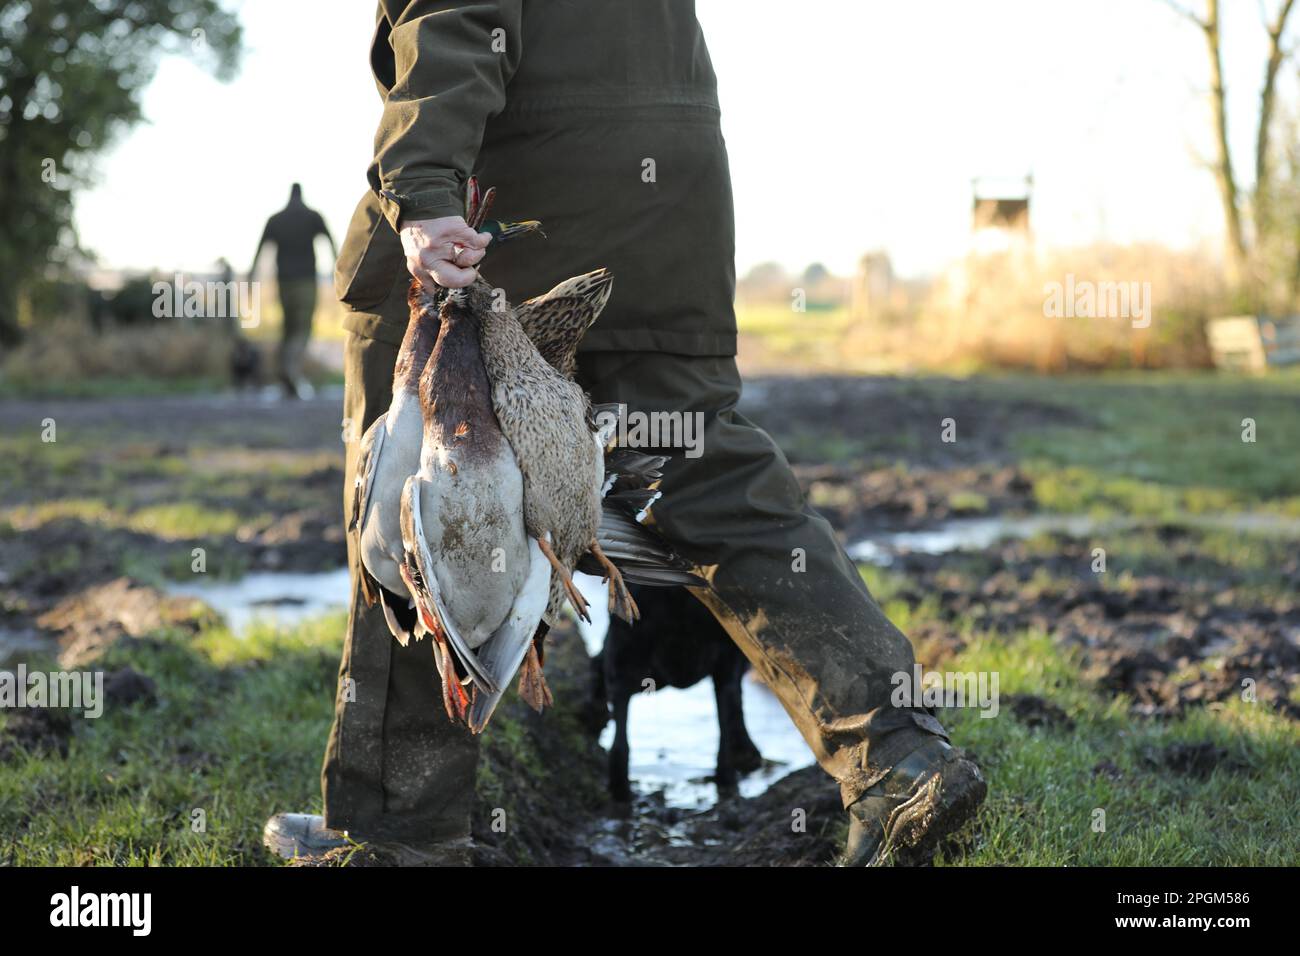 A man carrying dead ducks on a shoot in the countryside Stock Photo